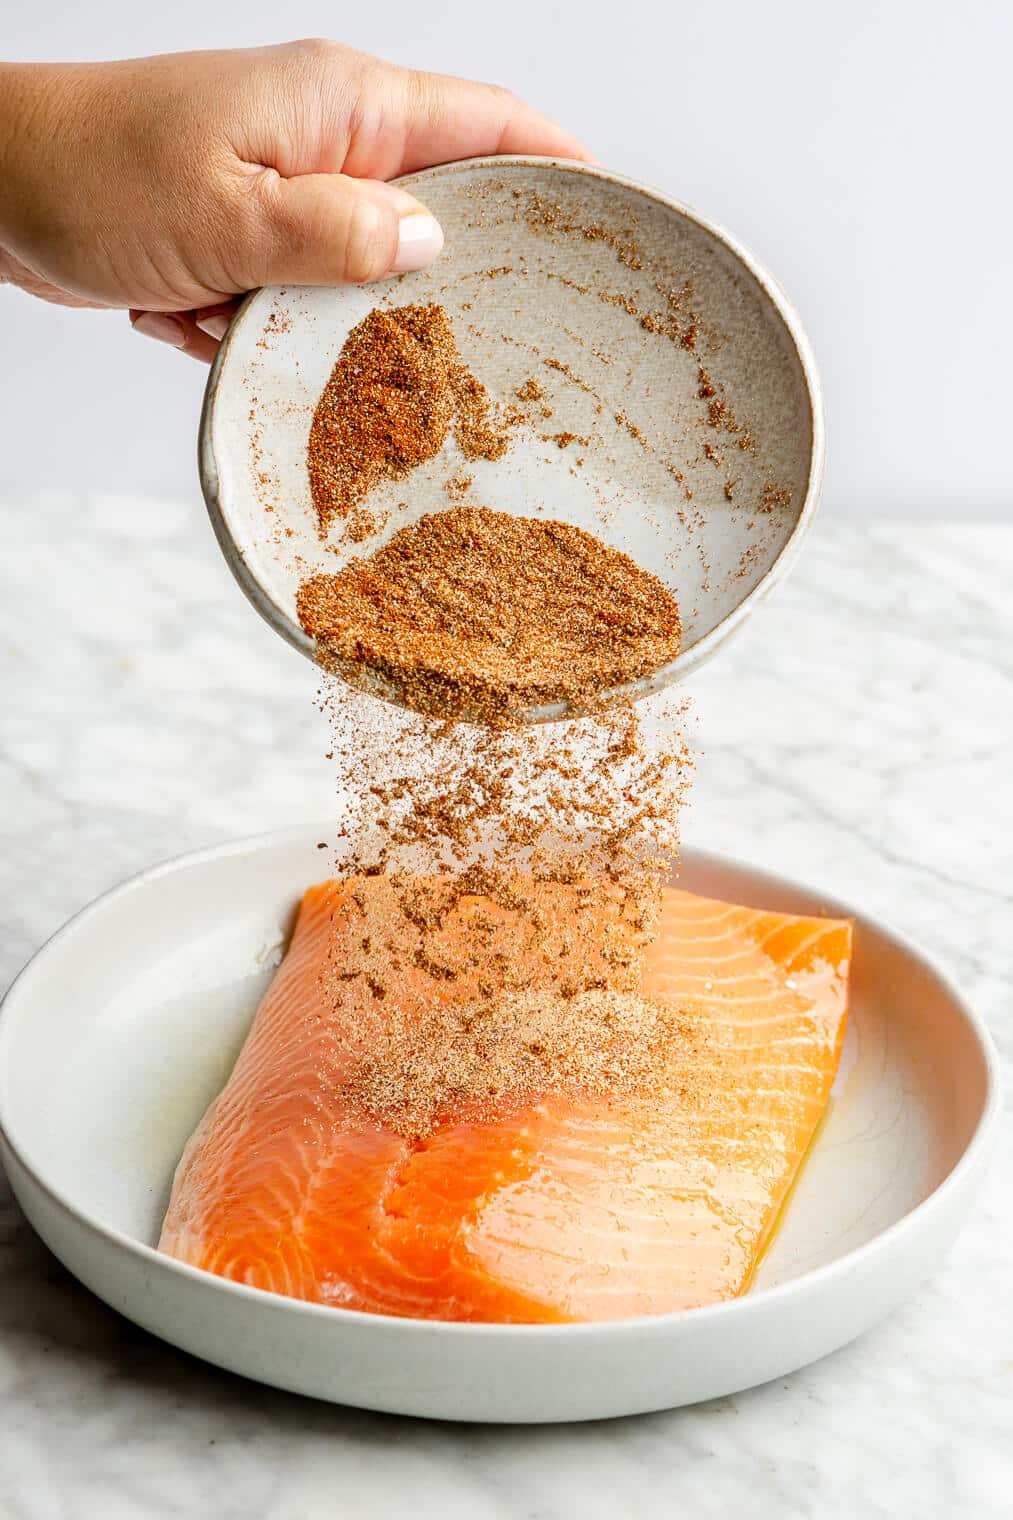 Hand pouring a mixture of spices over top an oil coated salmon filet.